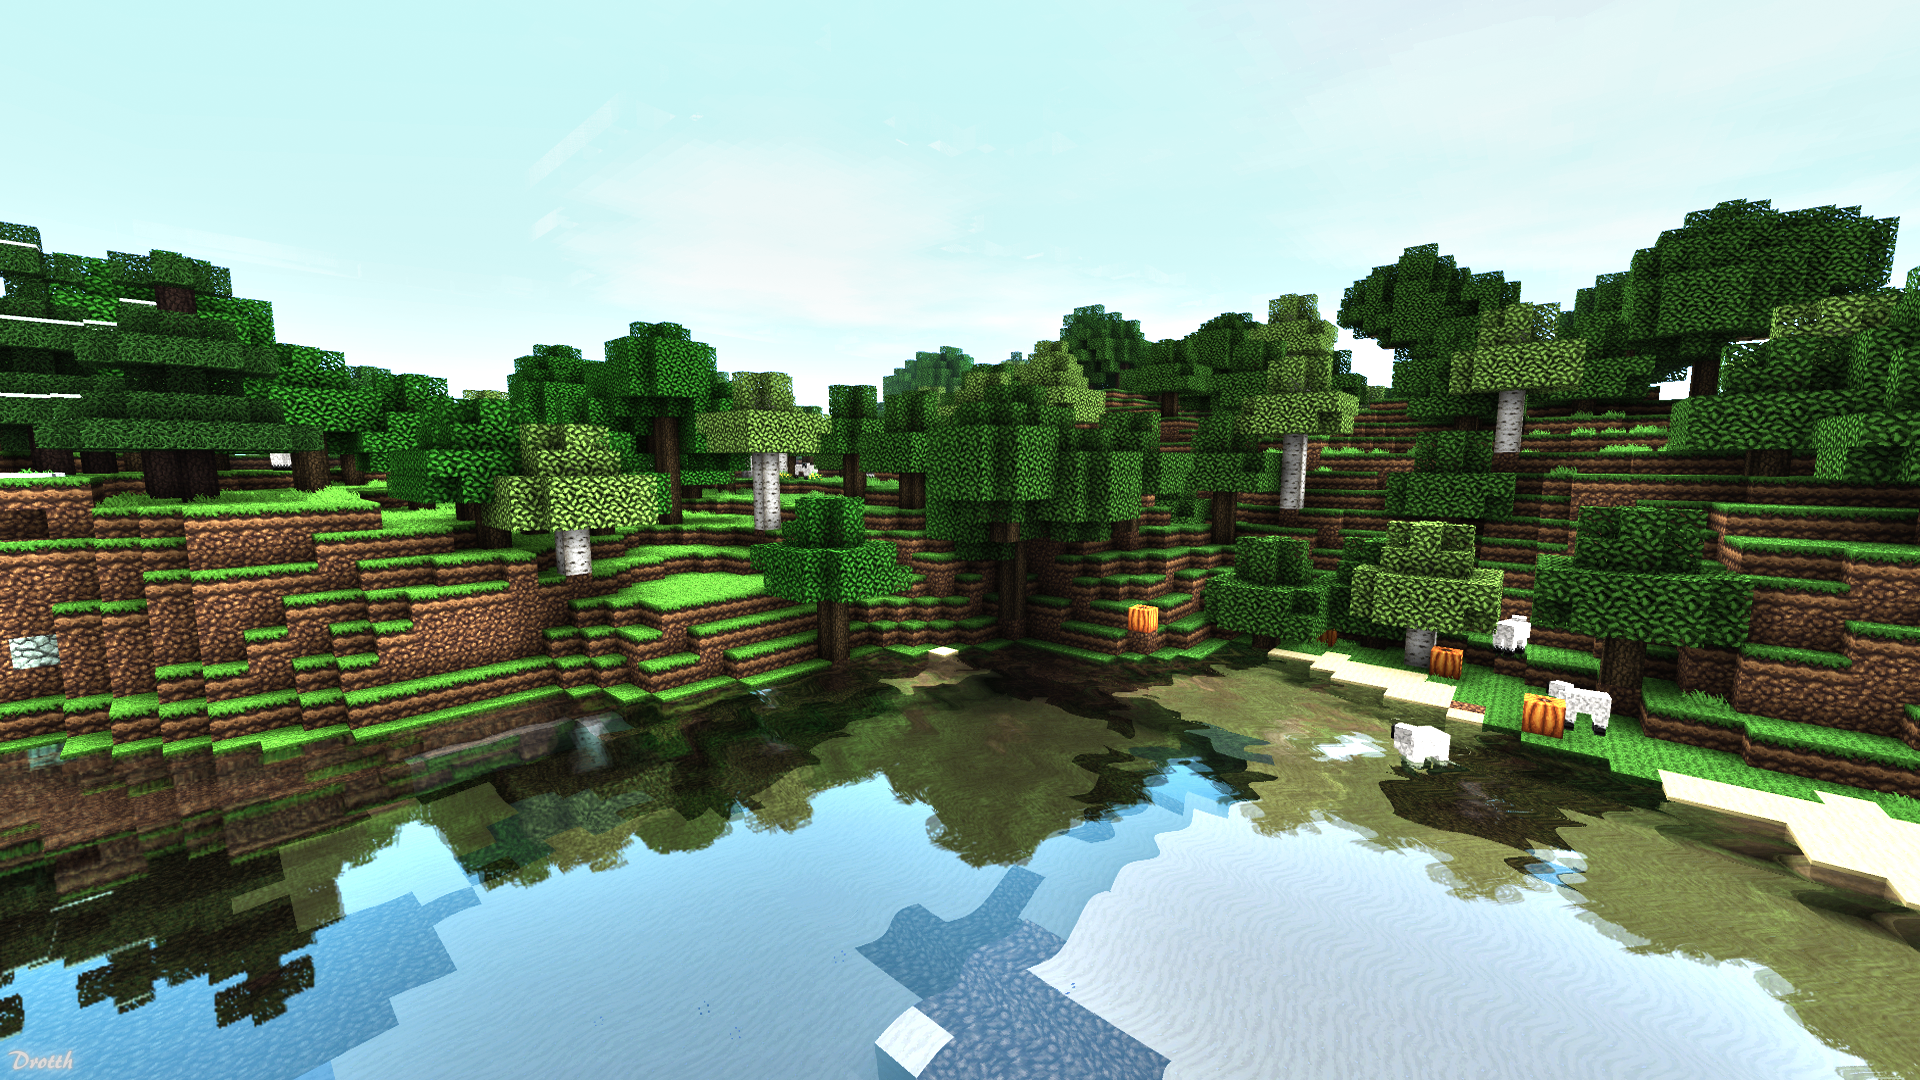 Just Some Minecraft Landscapes Wallpapers - HD Wallpaper 